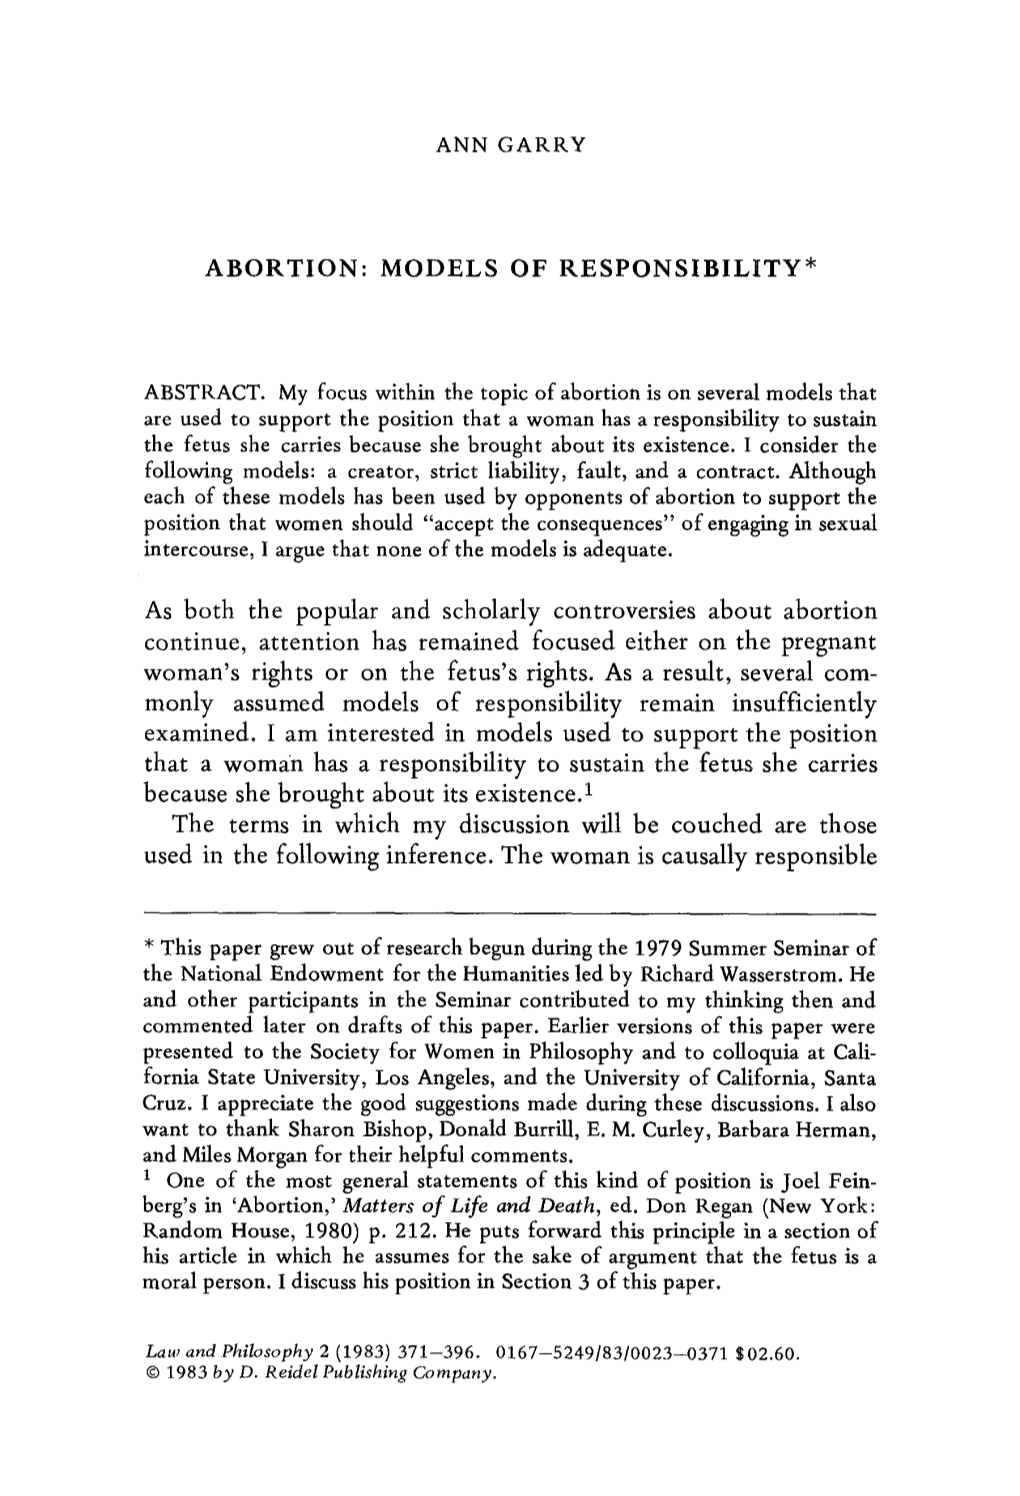 Abortion: Models of Responsibility*